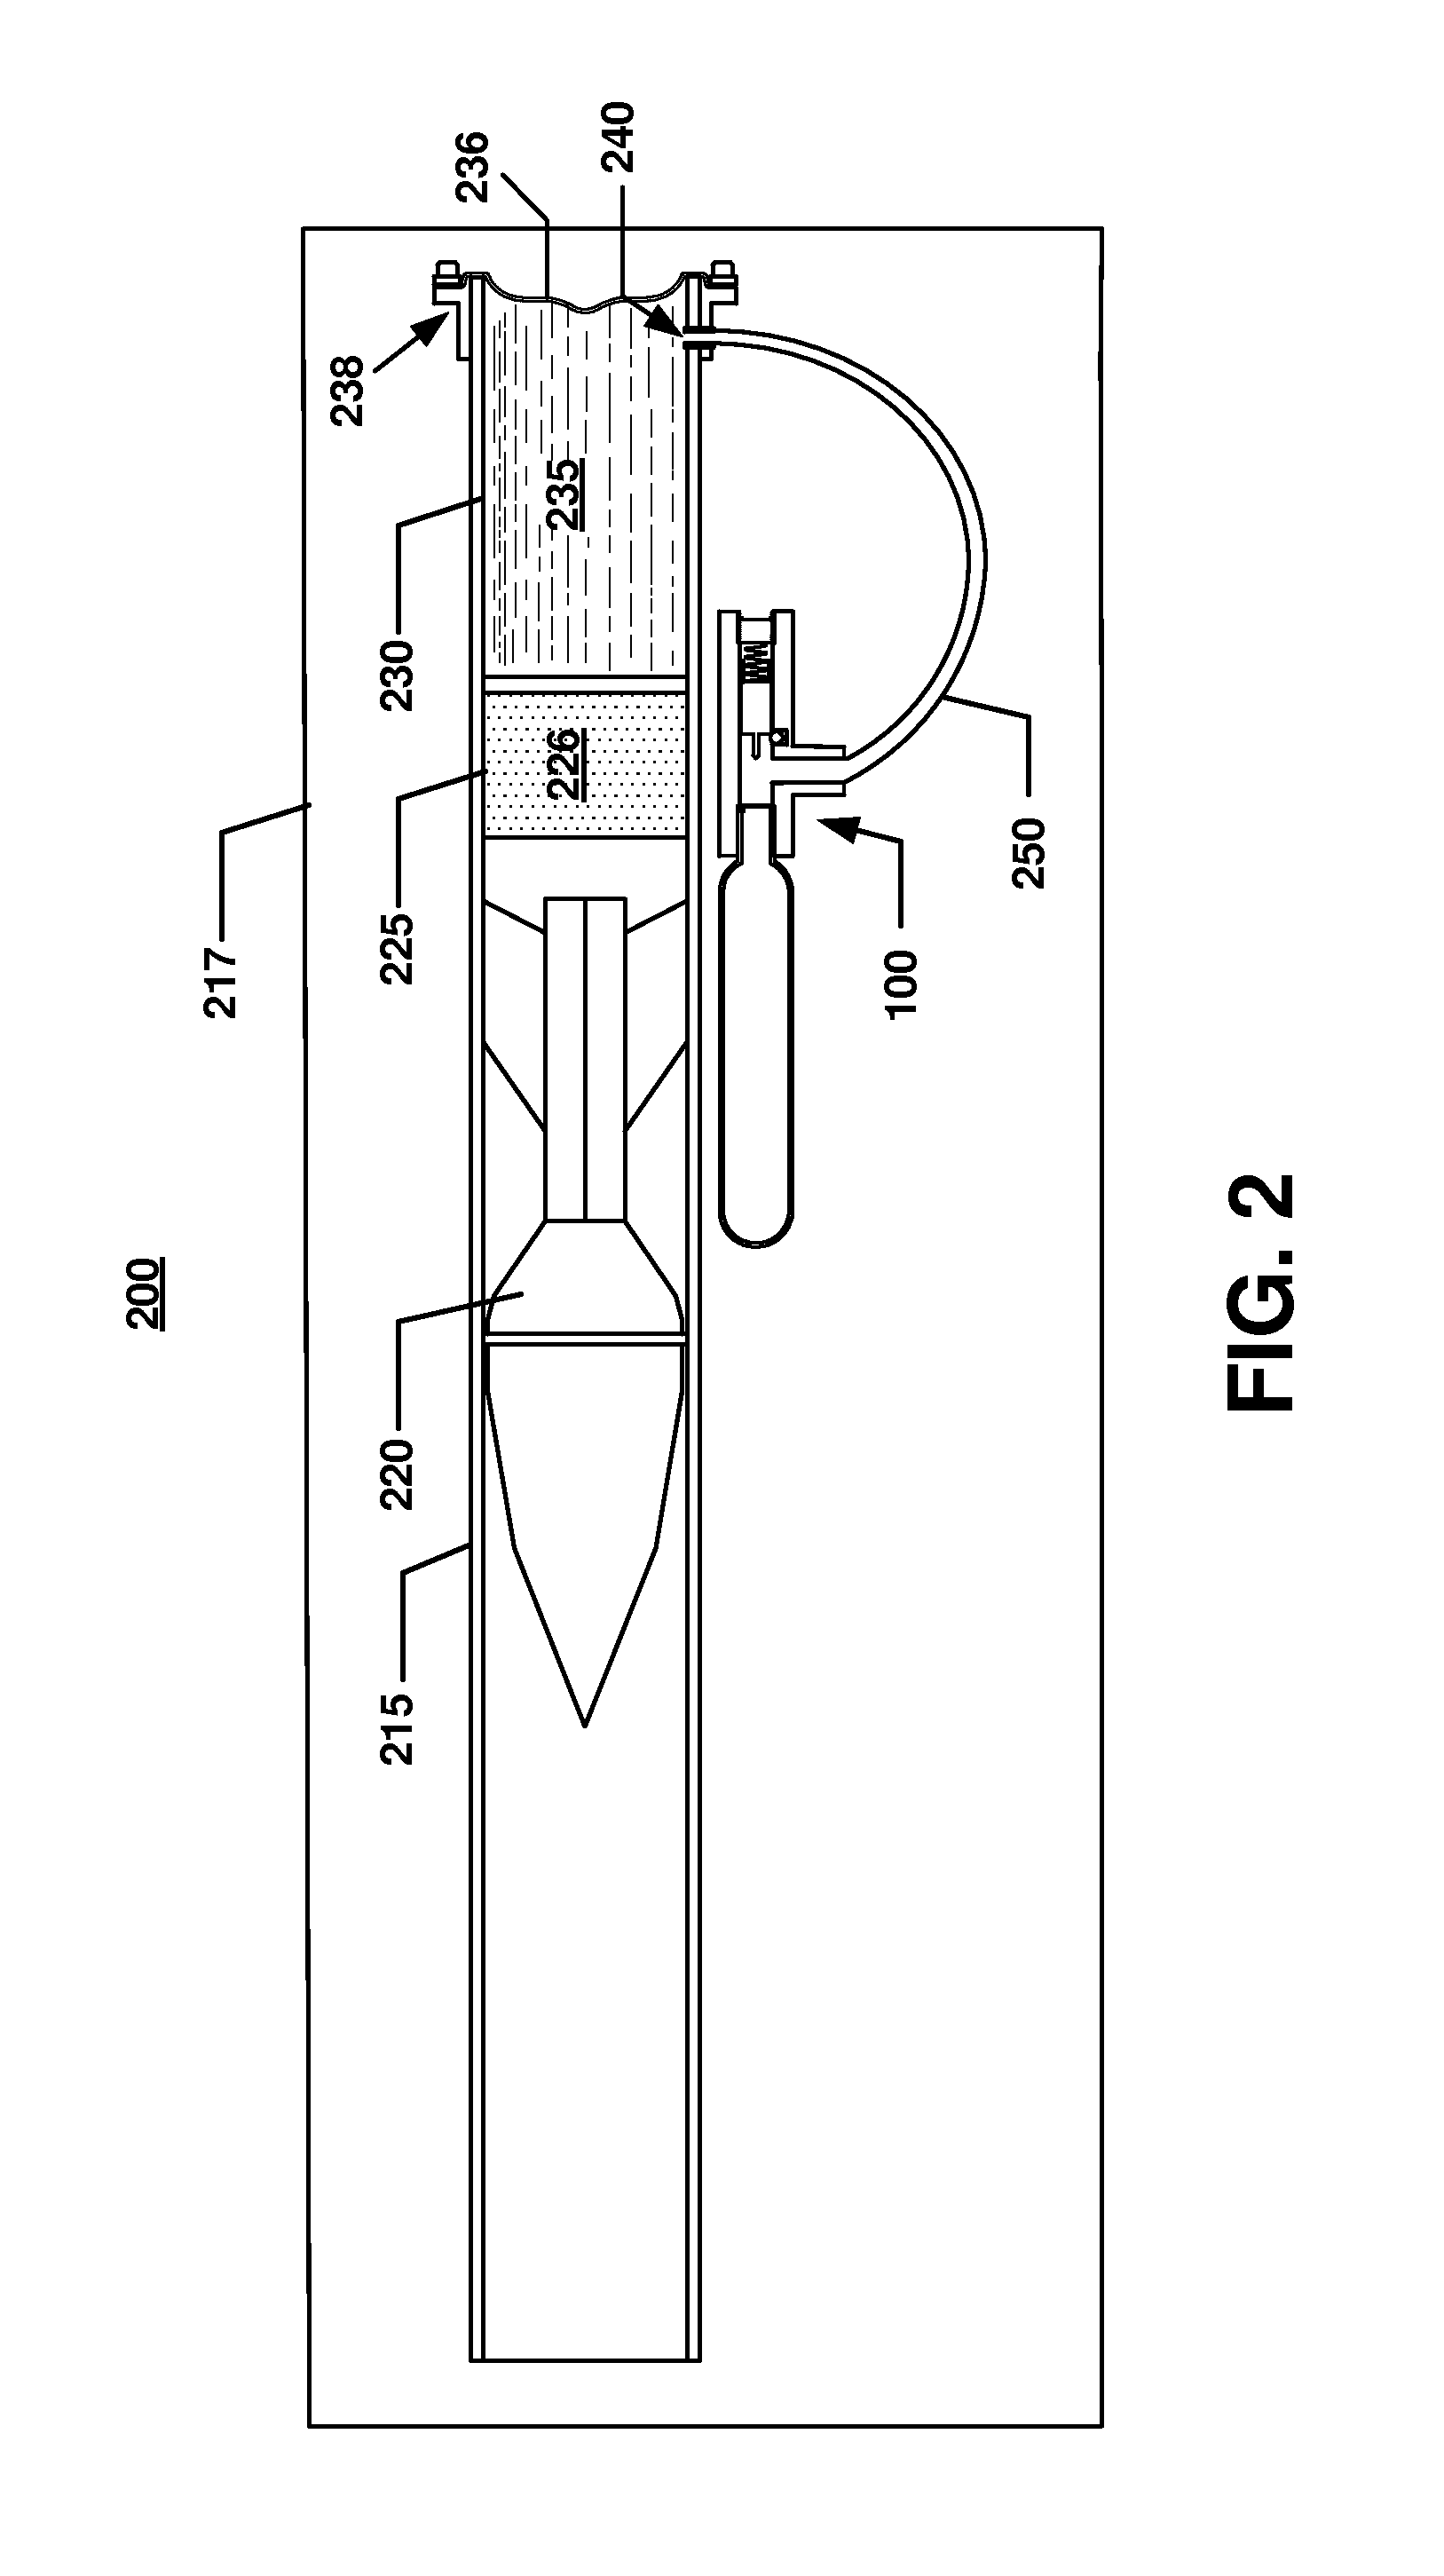 Bleeding mechanism for use in a propulsion system of a recoilless, insensitive munition